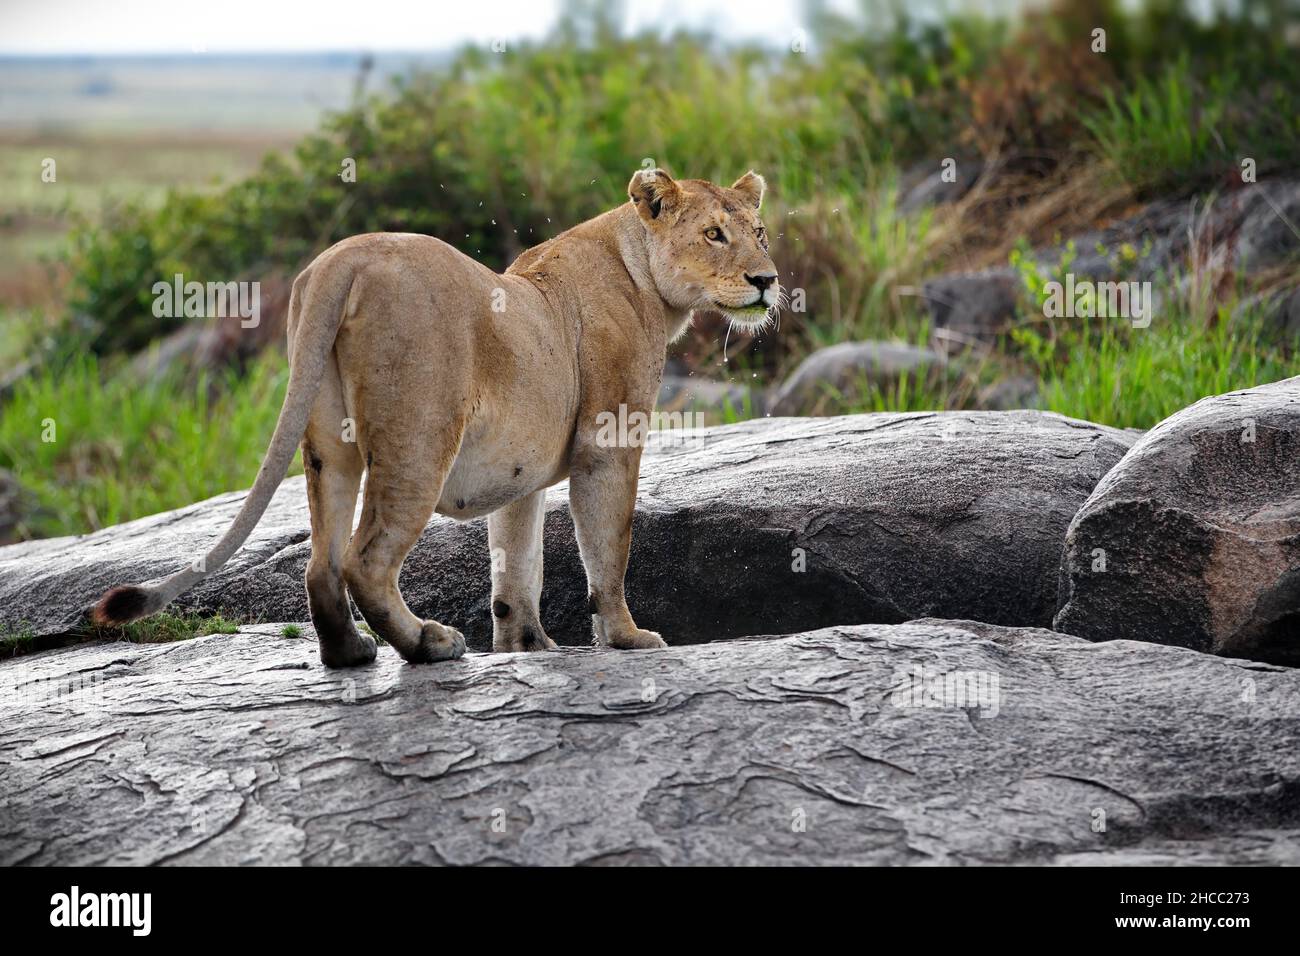 Lioness in Tanzania nature during daylight Stock Photo